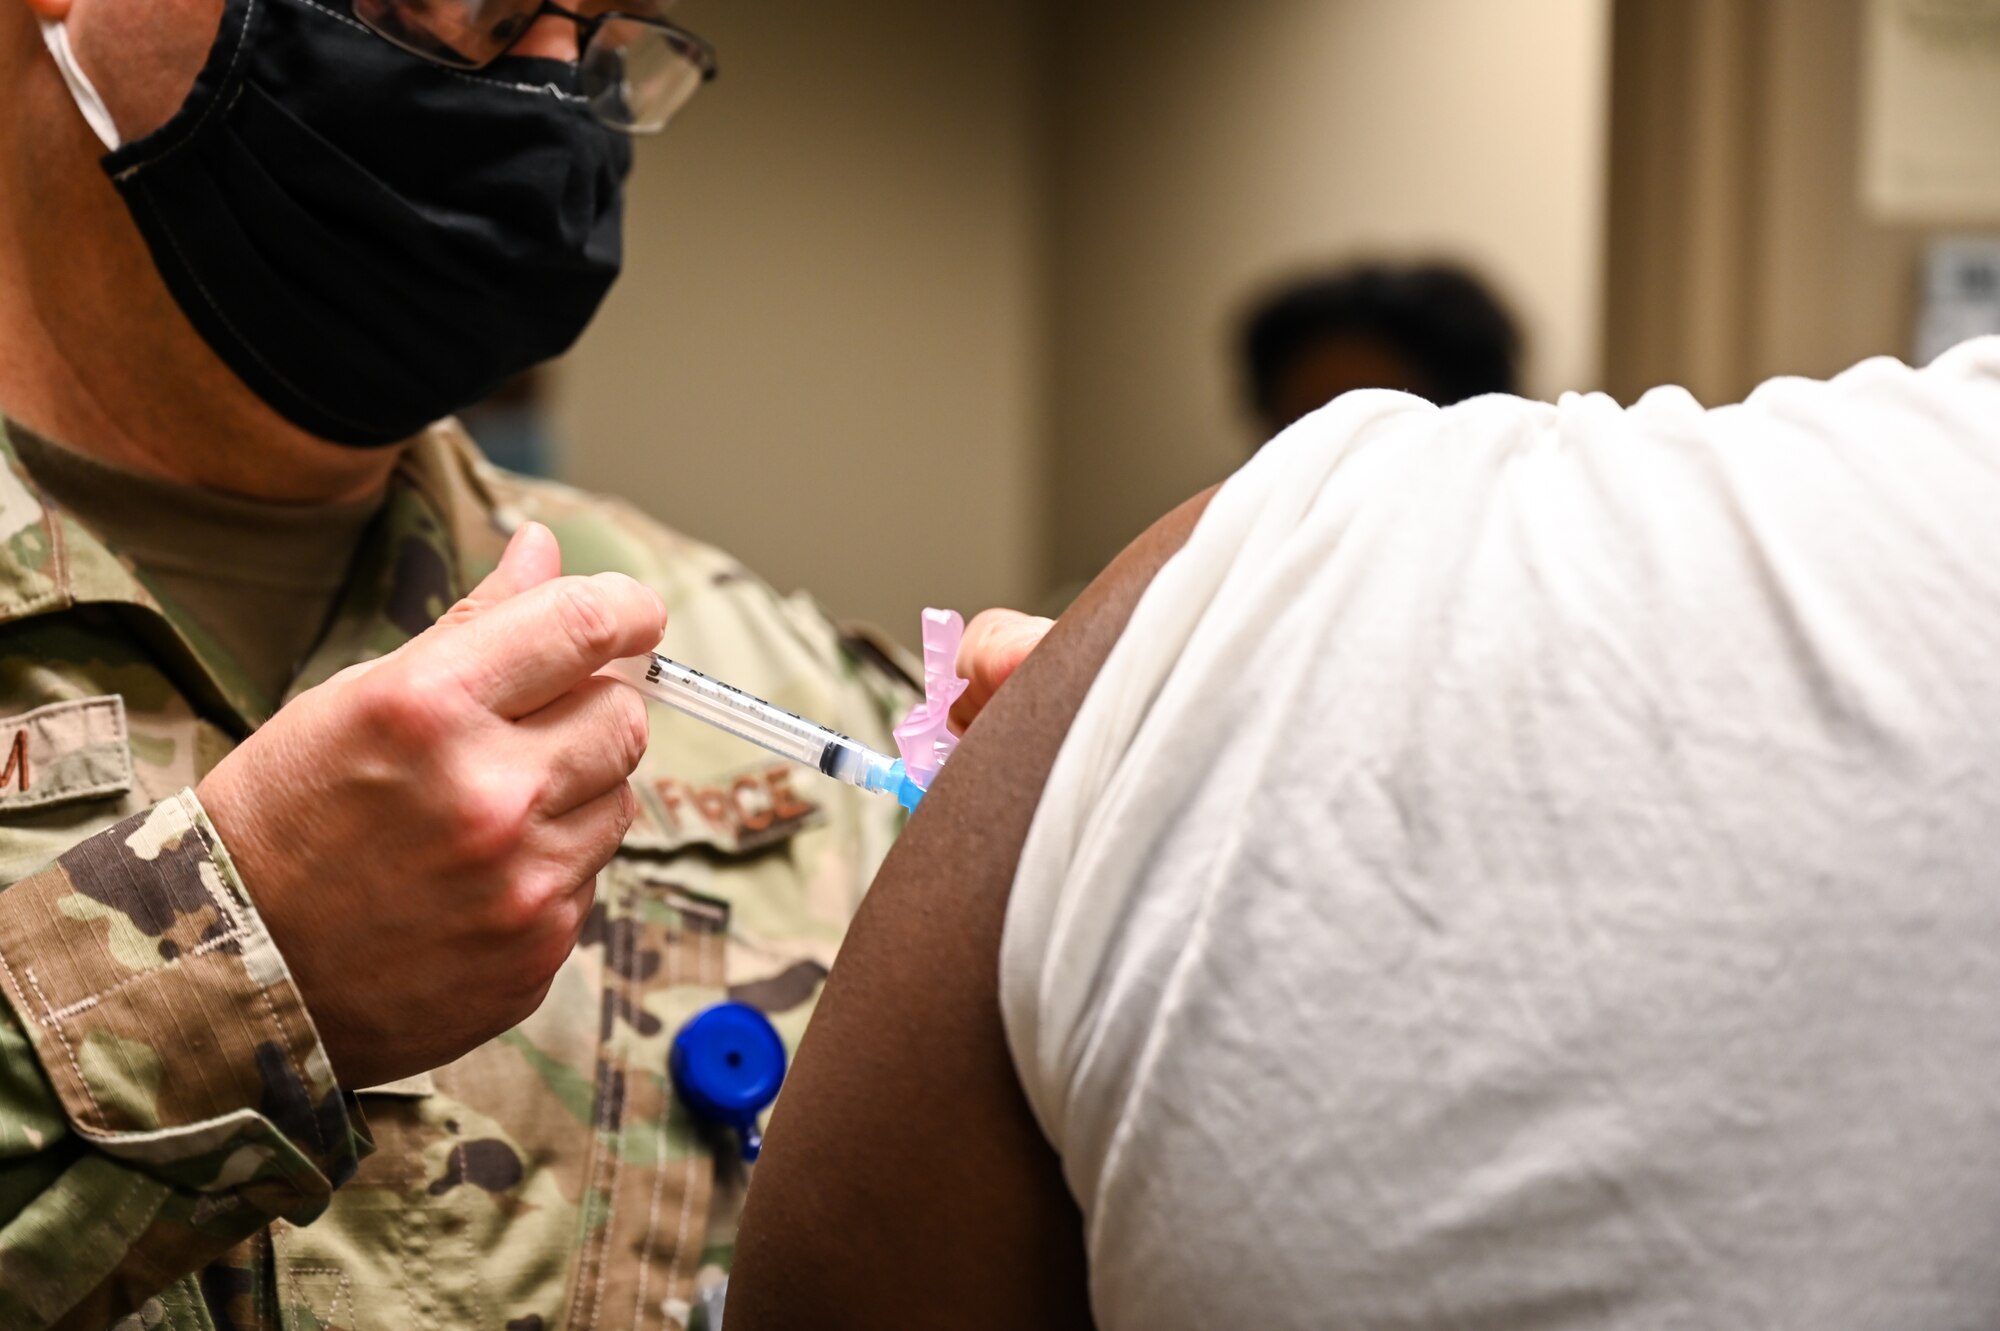 Airmen from the 2nd Medical Group receive the first doses of the COVID-19 vaccination at Barksdale Air Force Base, La., Jan. 6, 2021. The Department of Defense continues to deliver on the Acting Secretary of Defense’s priorities during the COVID-19 pandemic to protect its people, maintain readiness and support the national COVID-19 response. (U.S. Air Force photo by Senior Airman Christina Graves)